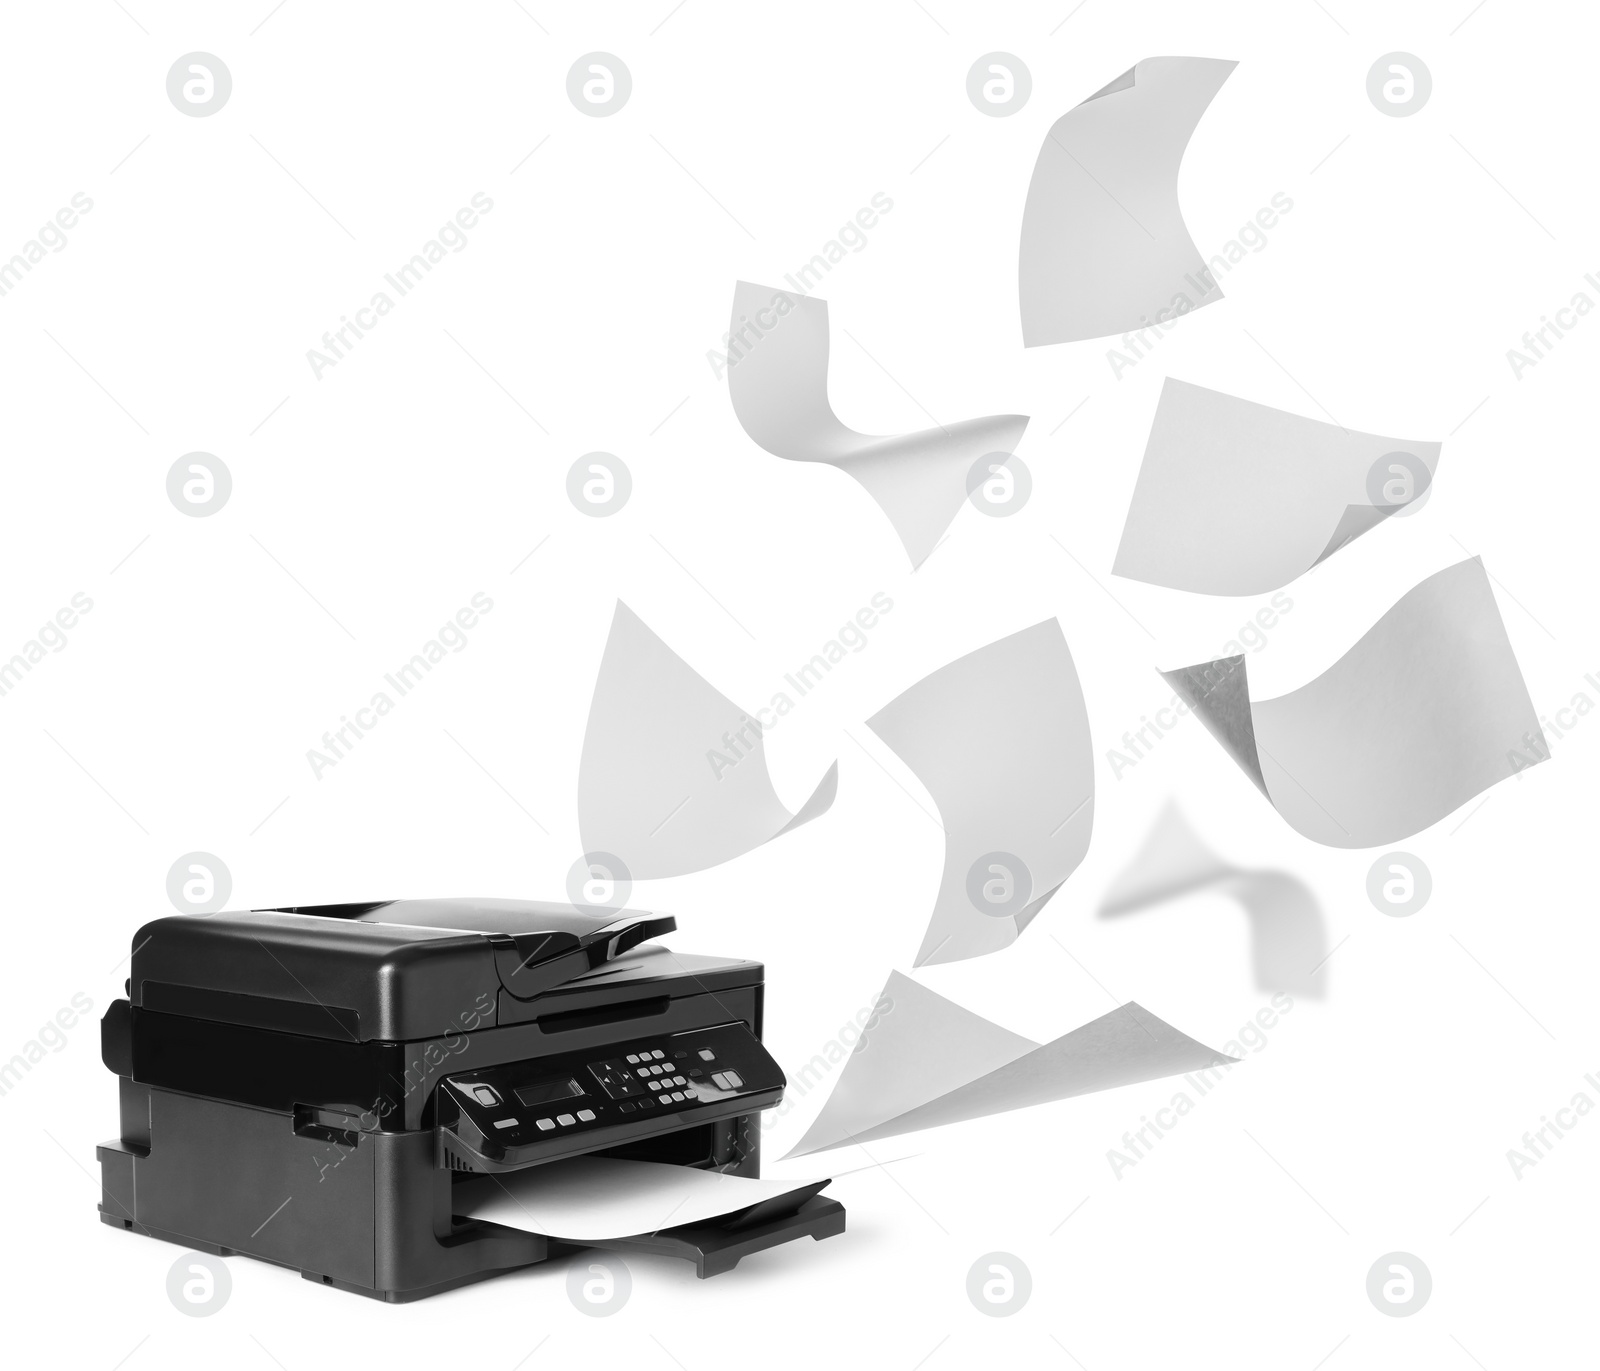 Image of Modern multifunction printer and flying sheets of paper on white background